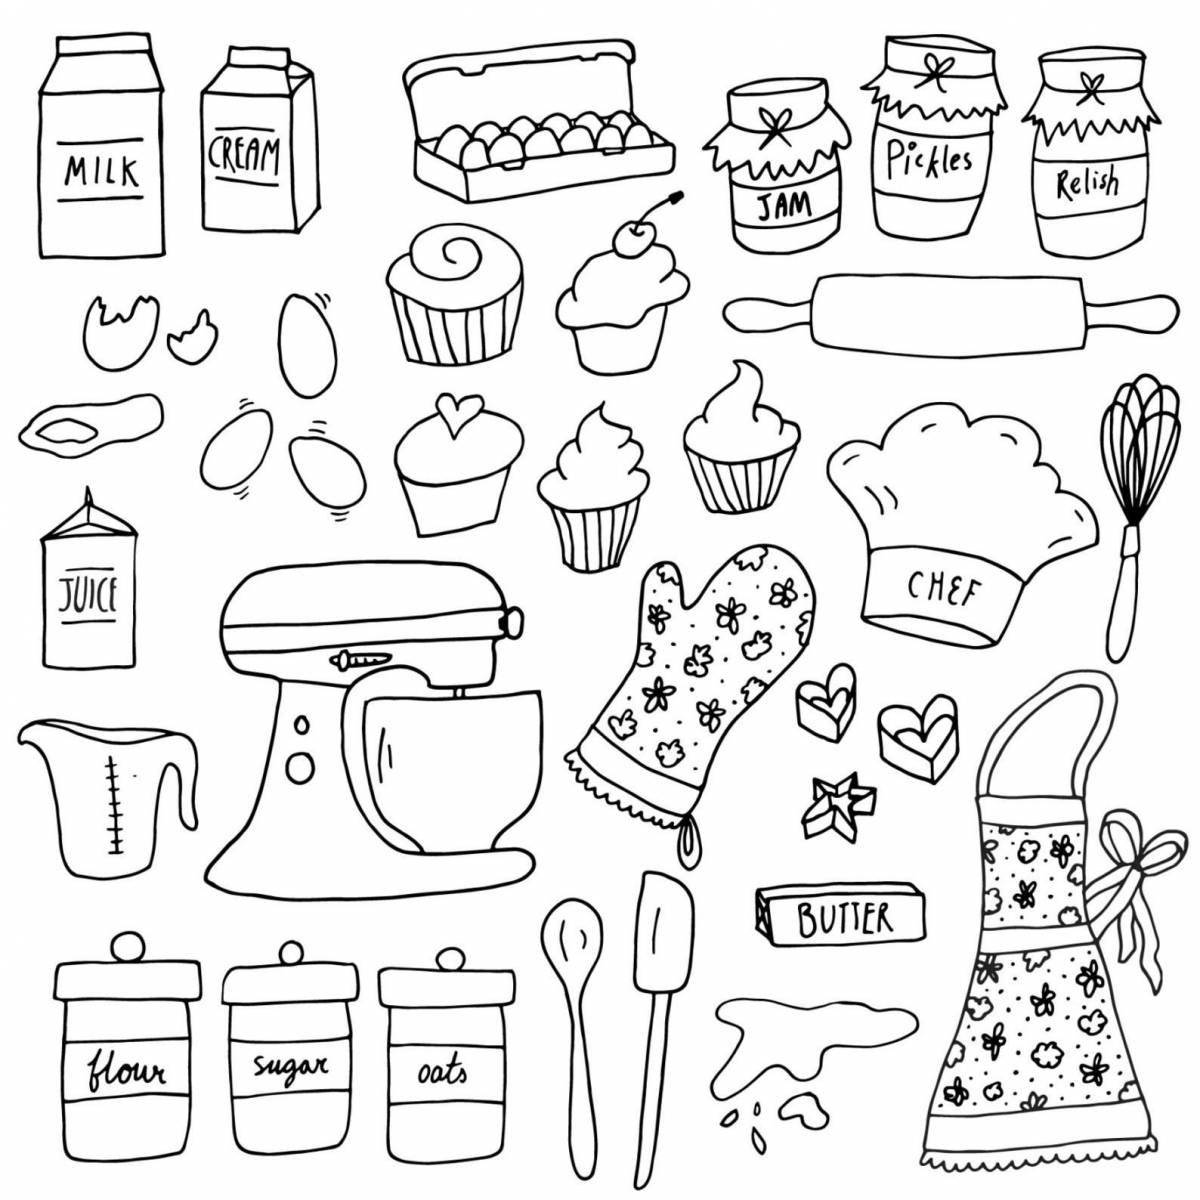 Colour-rich coloring small drawings for stickers